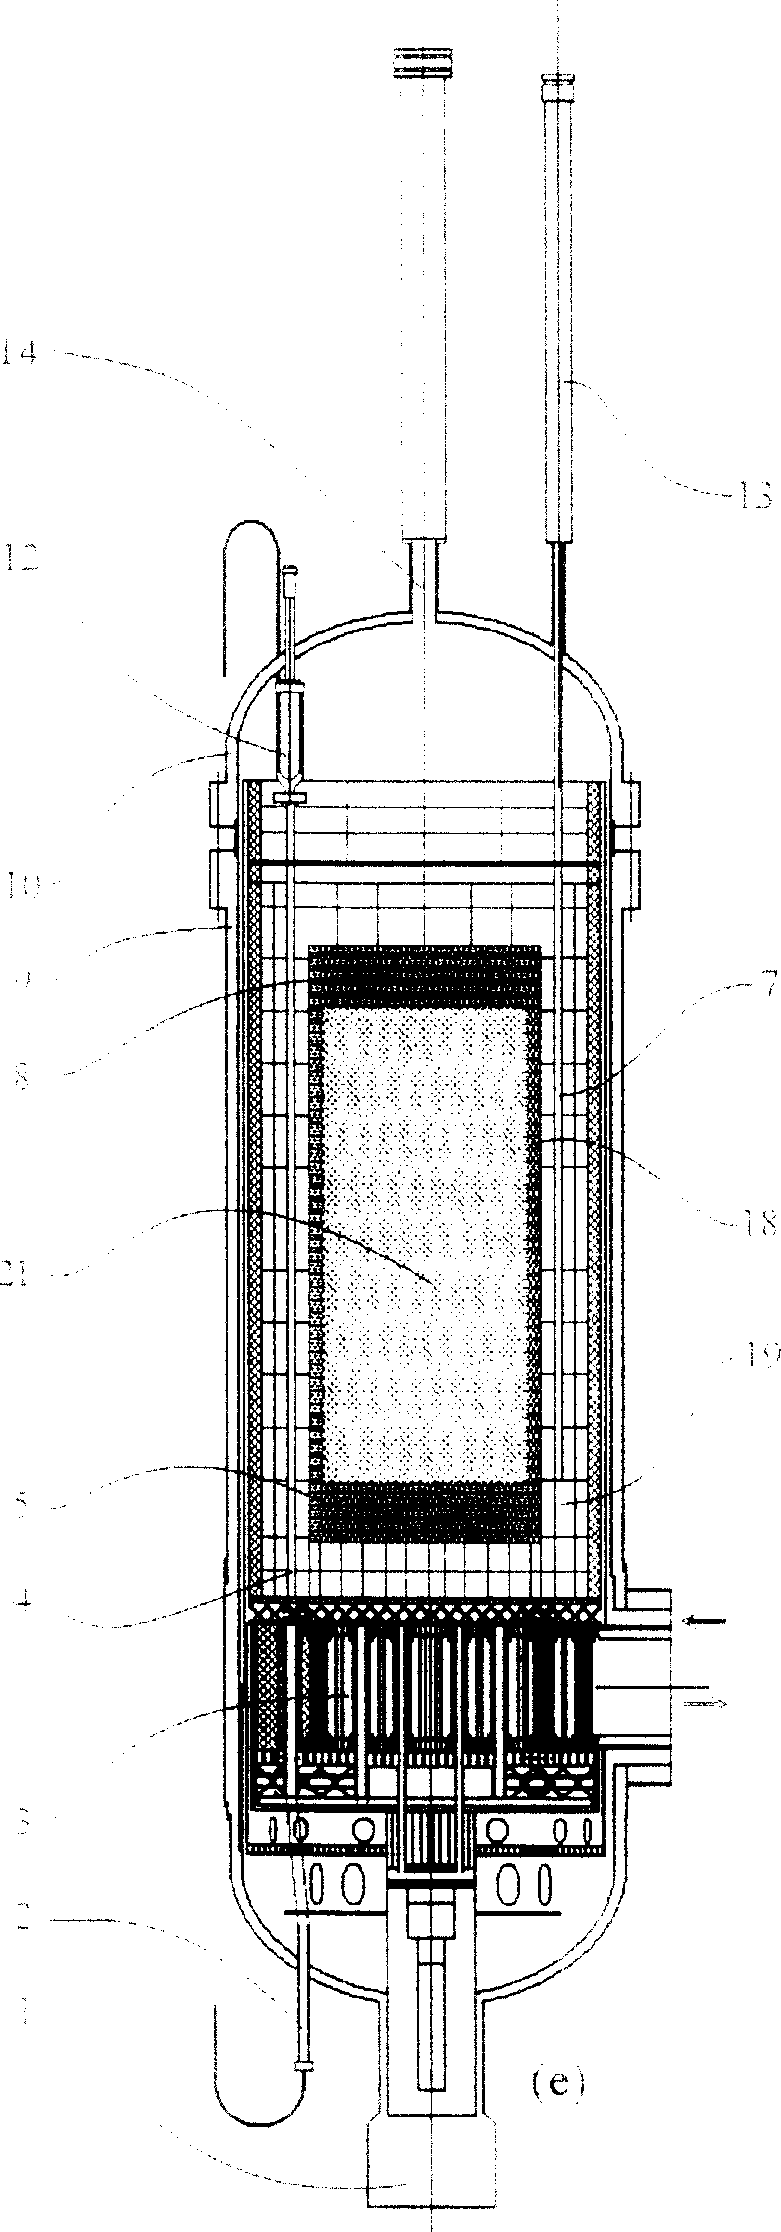 Regular bed modular high temperature gas cooled reactor and its fuel sphere disposal method